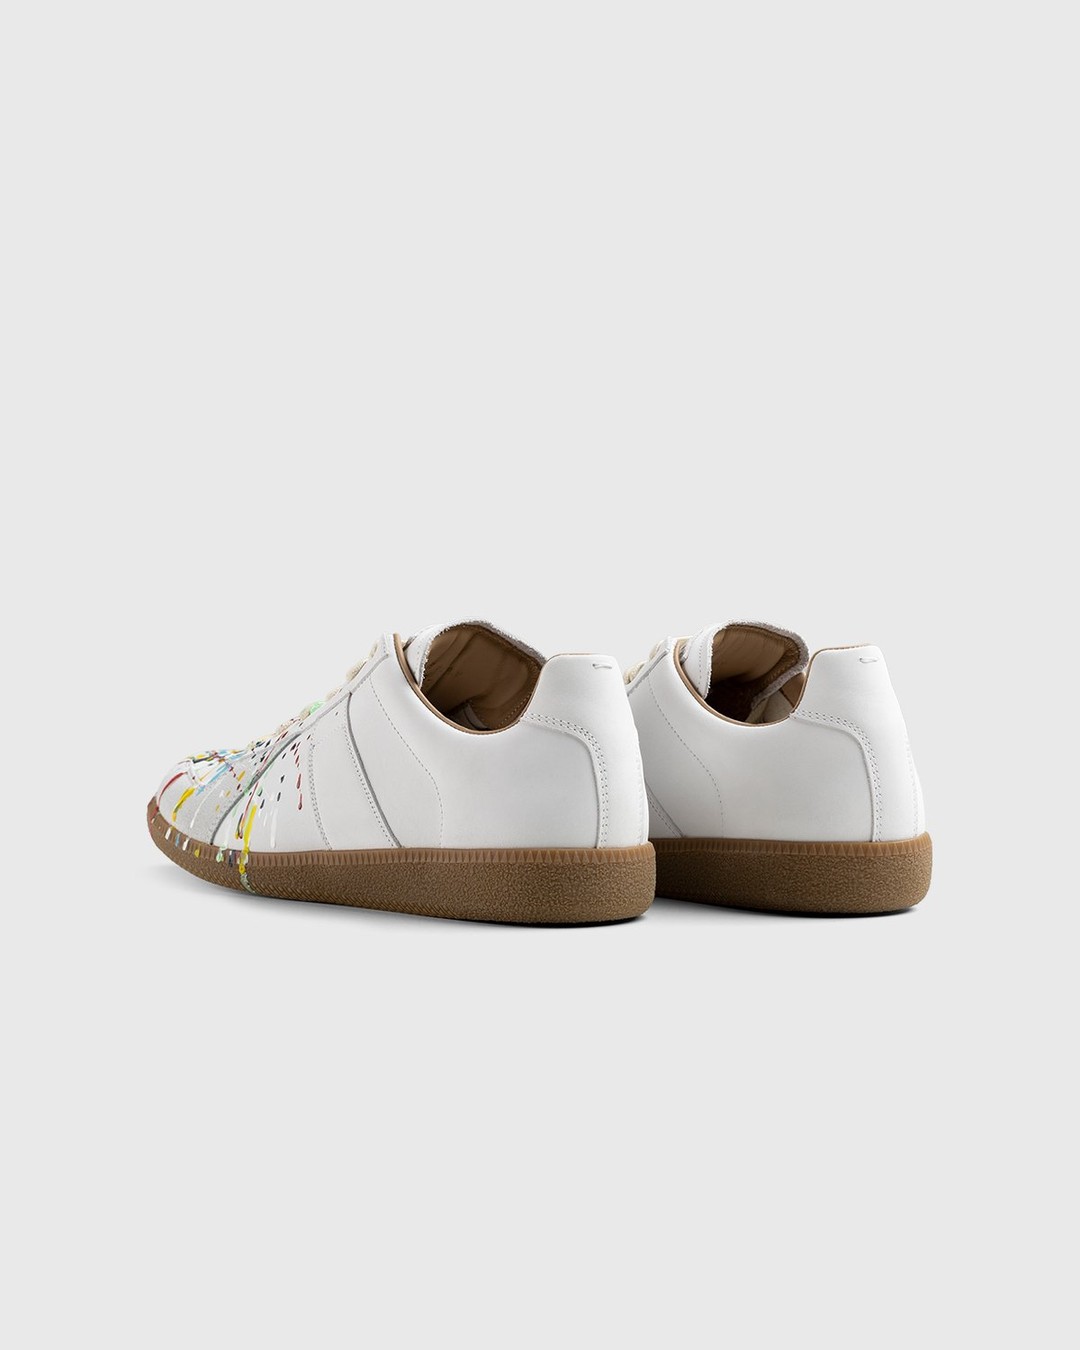 Maison Margiela – Replica Paint Drop Sneakers White - Low Top Sneakers - White - Image 3